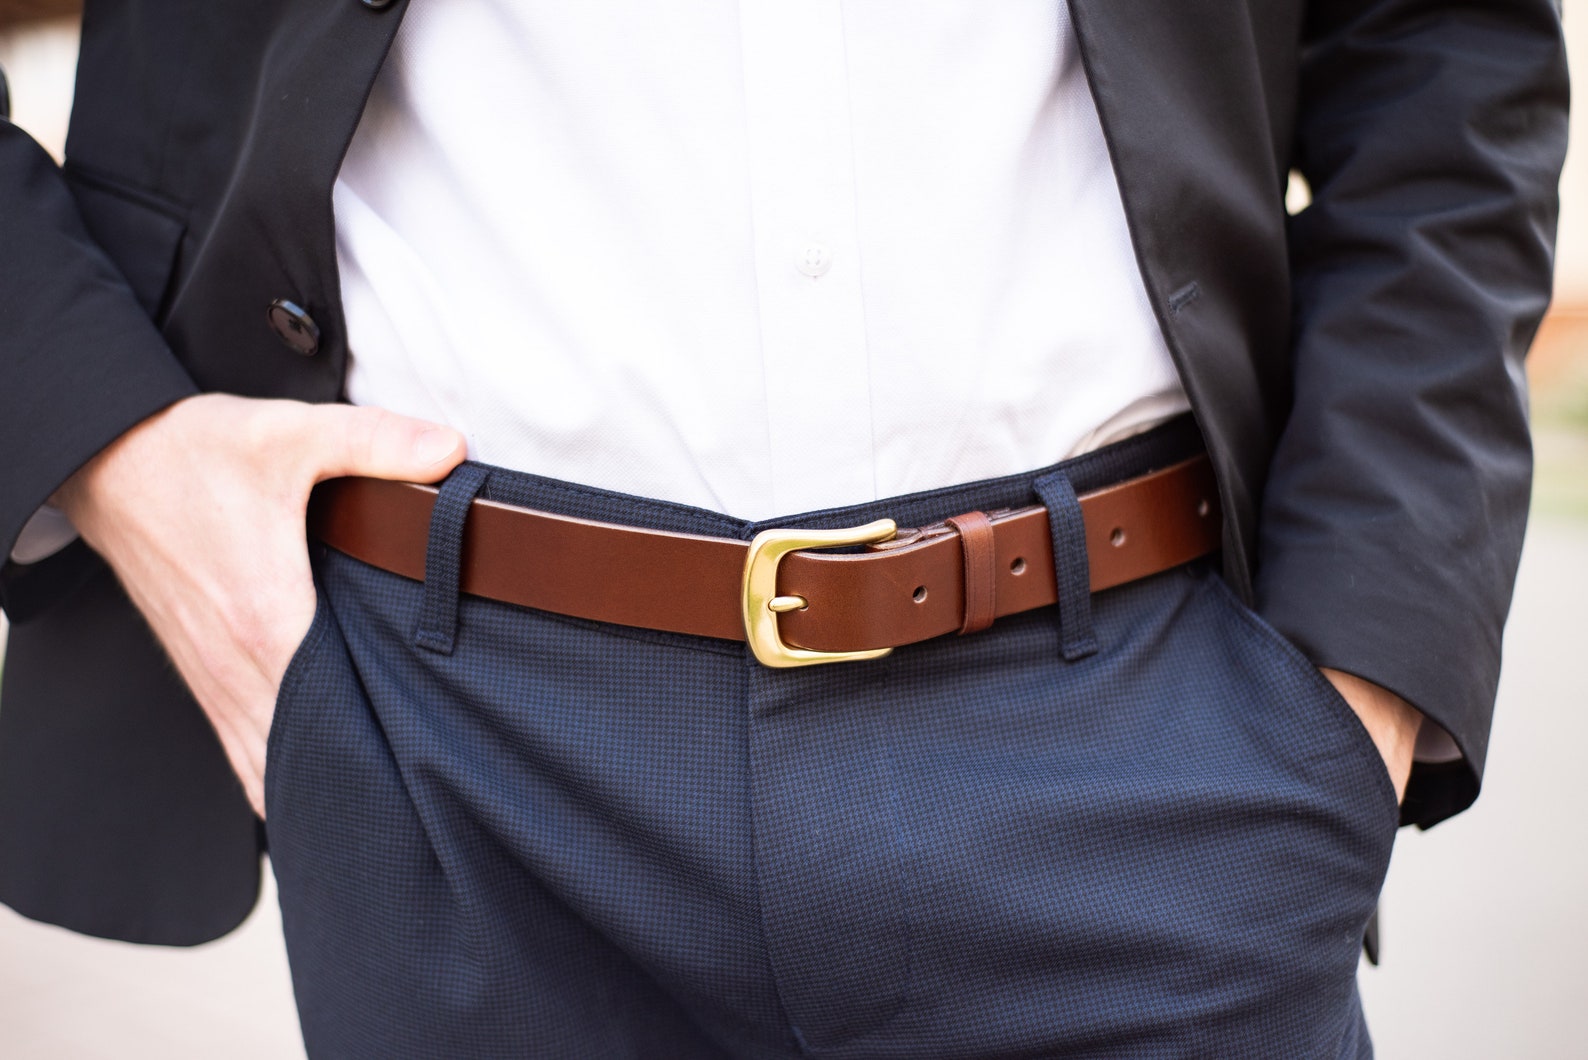 Handmade Personalised Men's Leather Belt in 3 Colors Gifts - Etsy